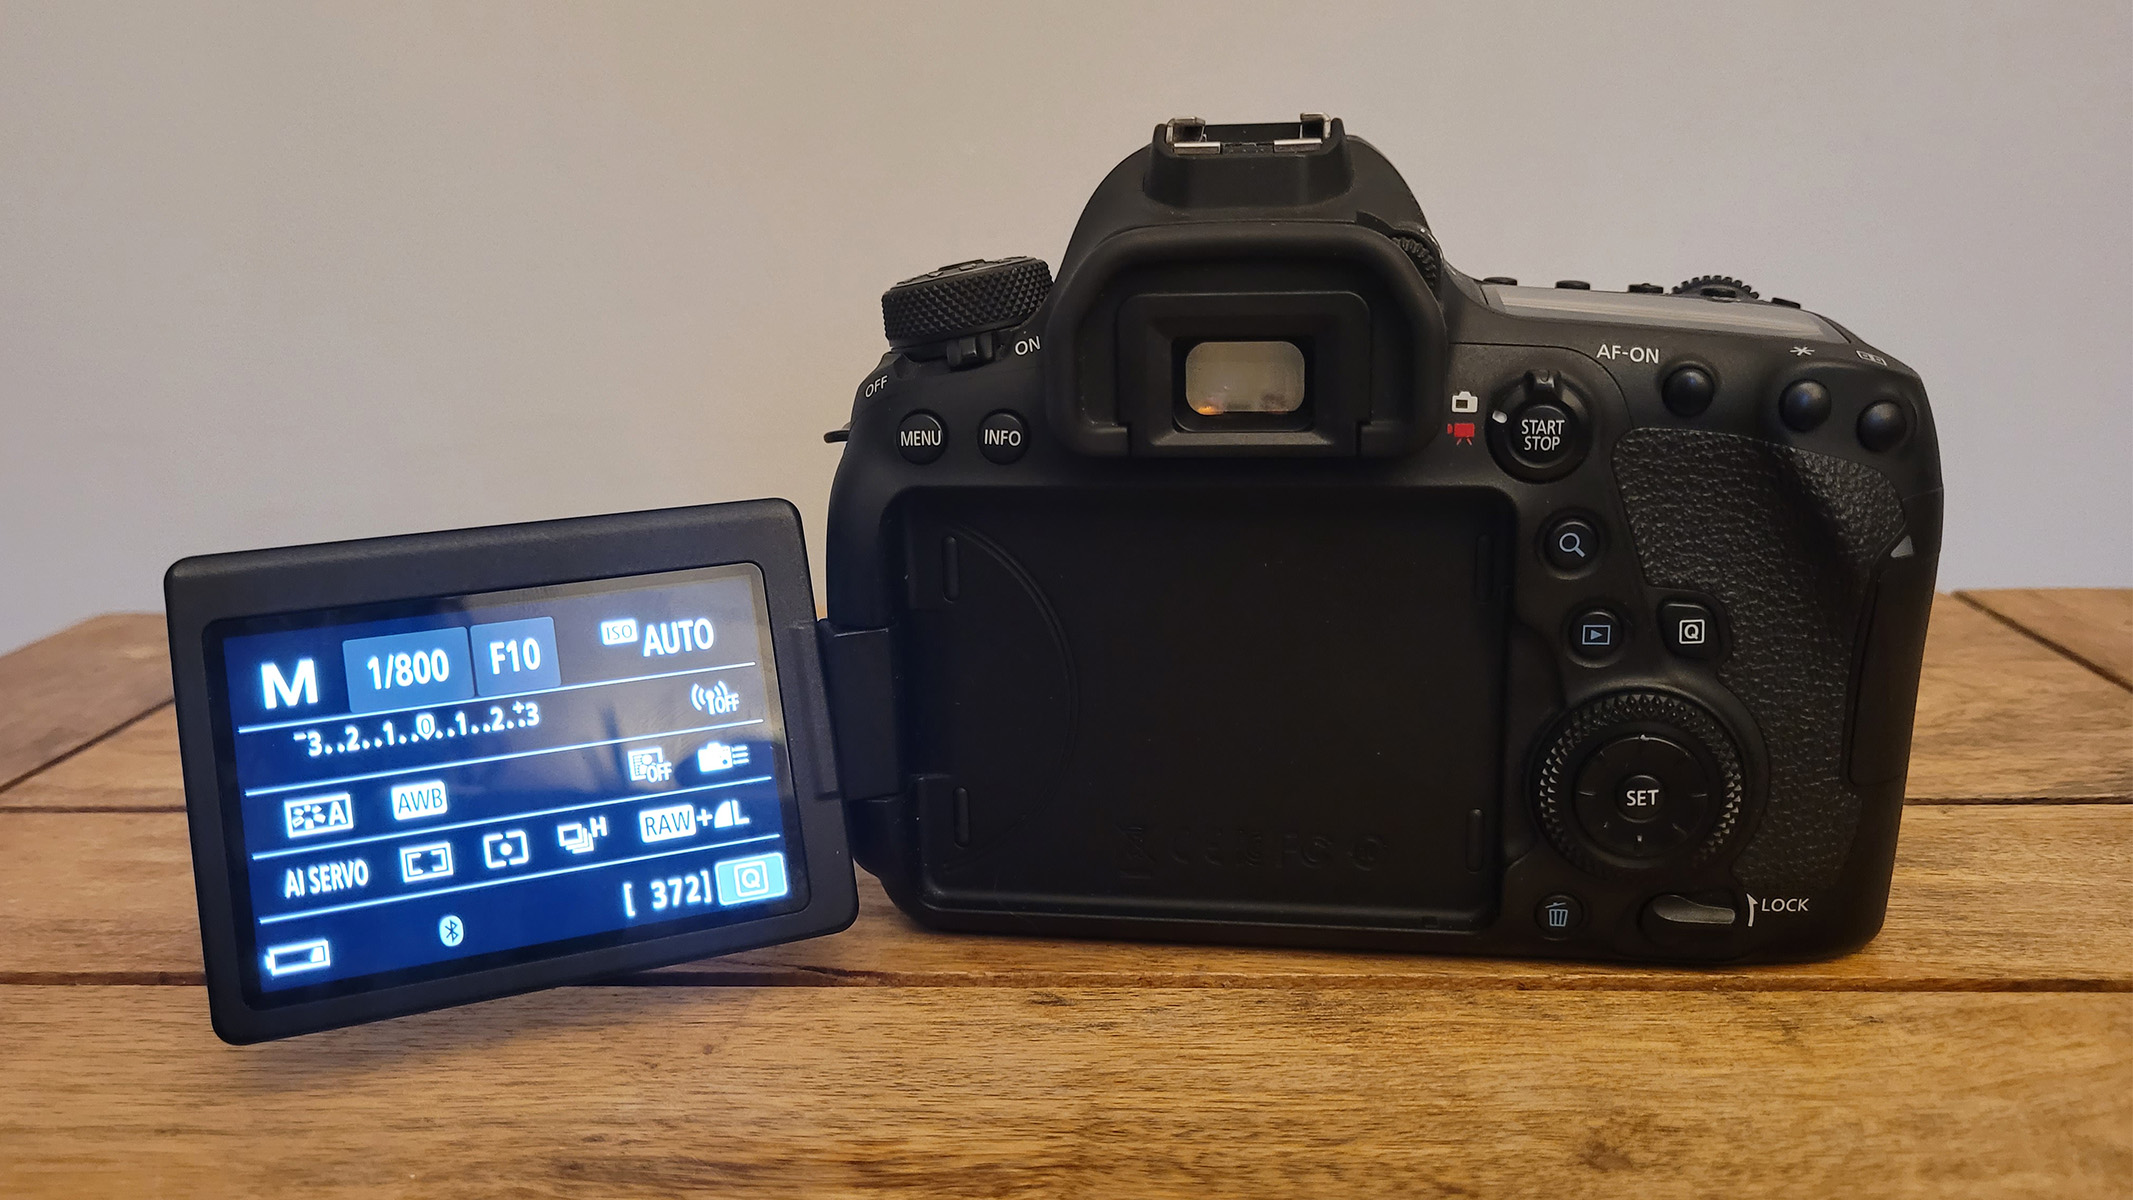 The rear of the Canon EOS 6D MK2